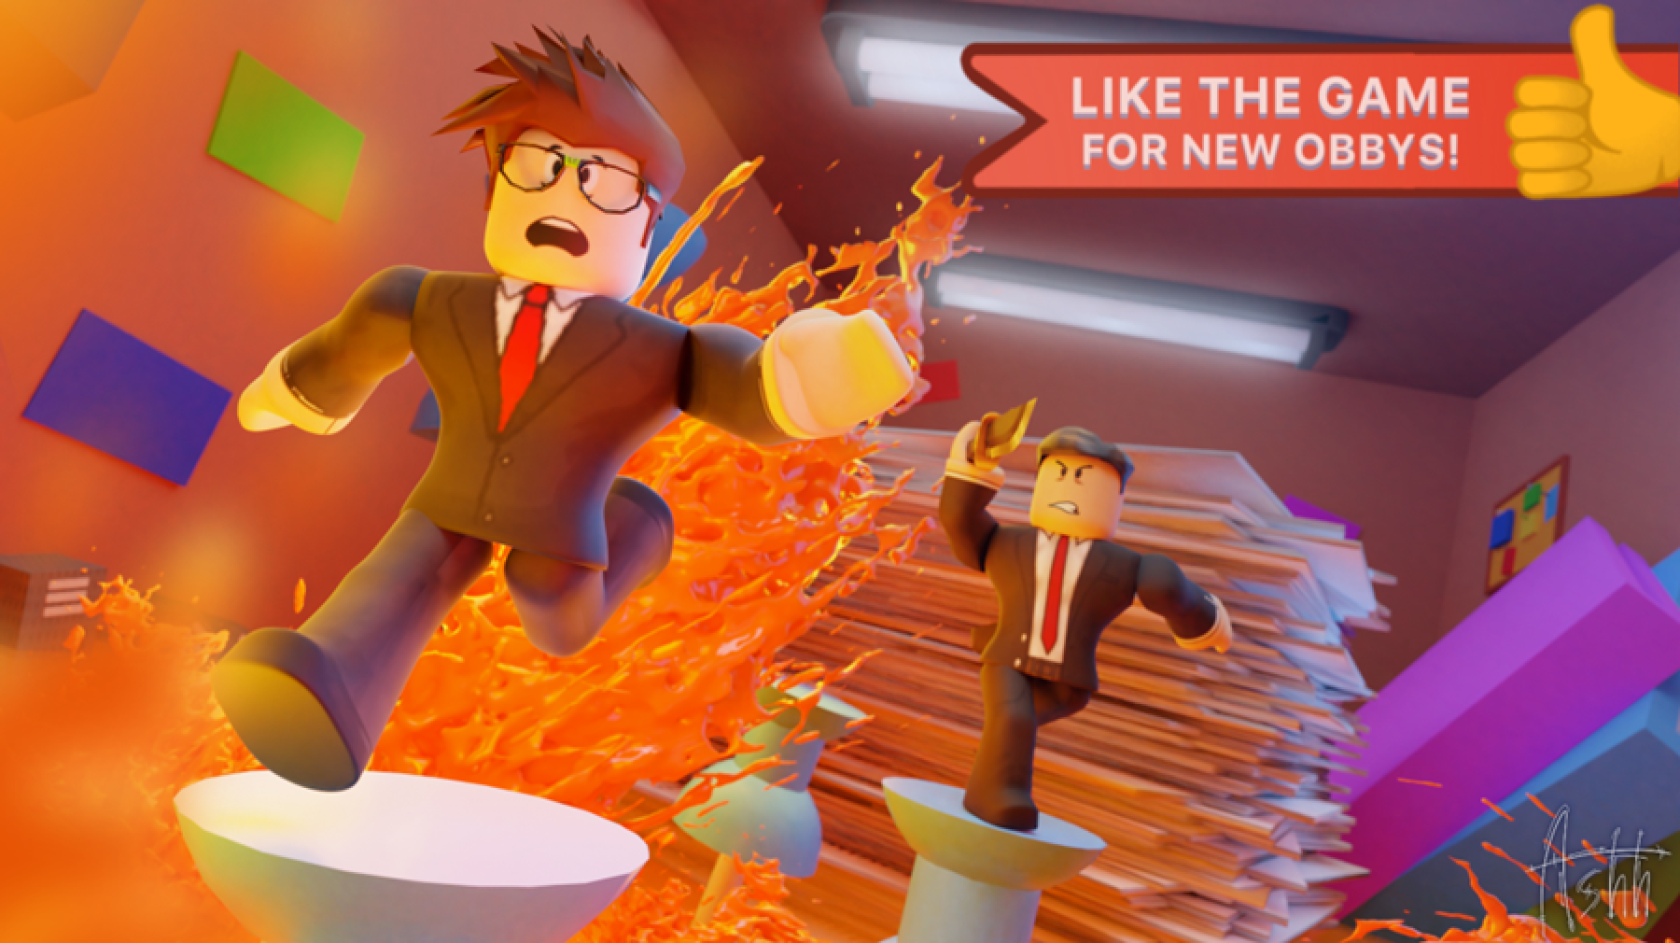 ESCAPE THE GUESTS OBBY IN ROBLOX!